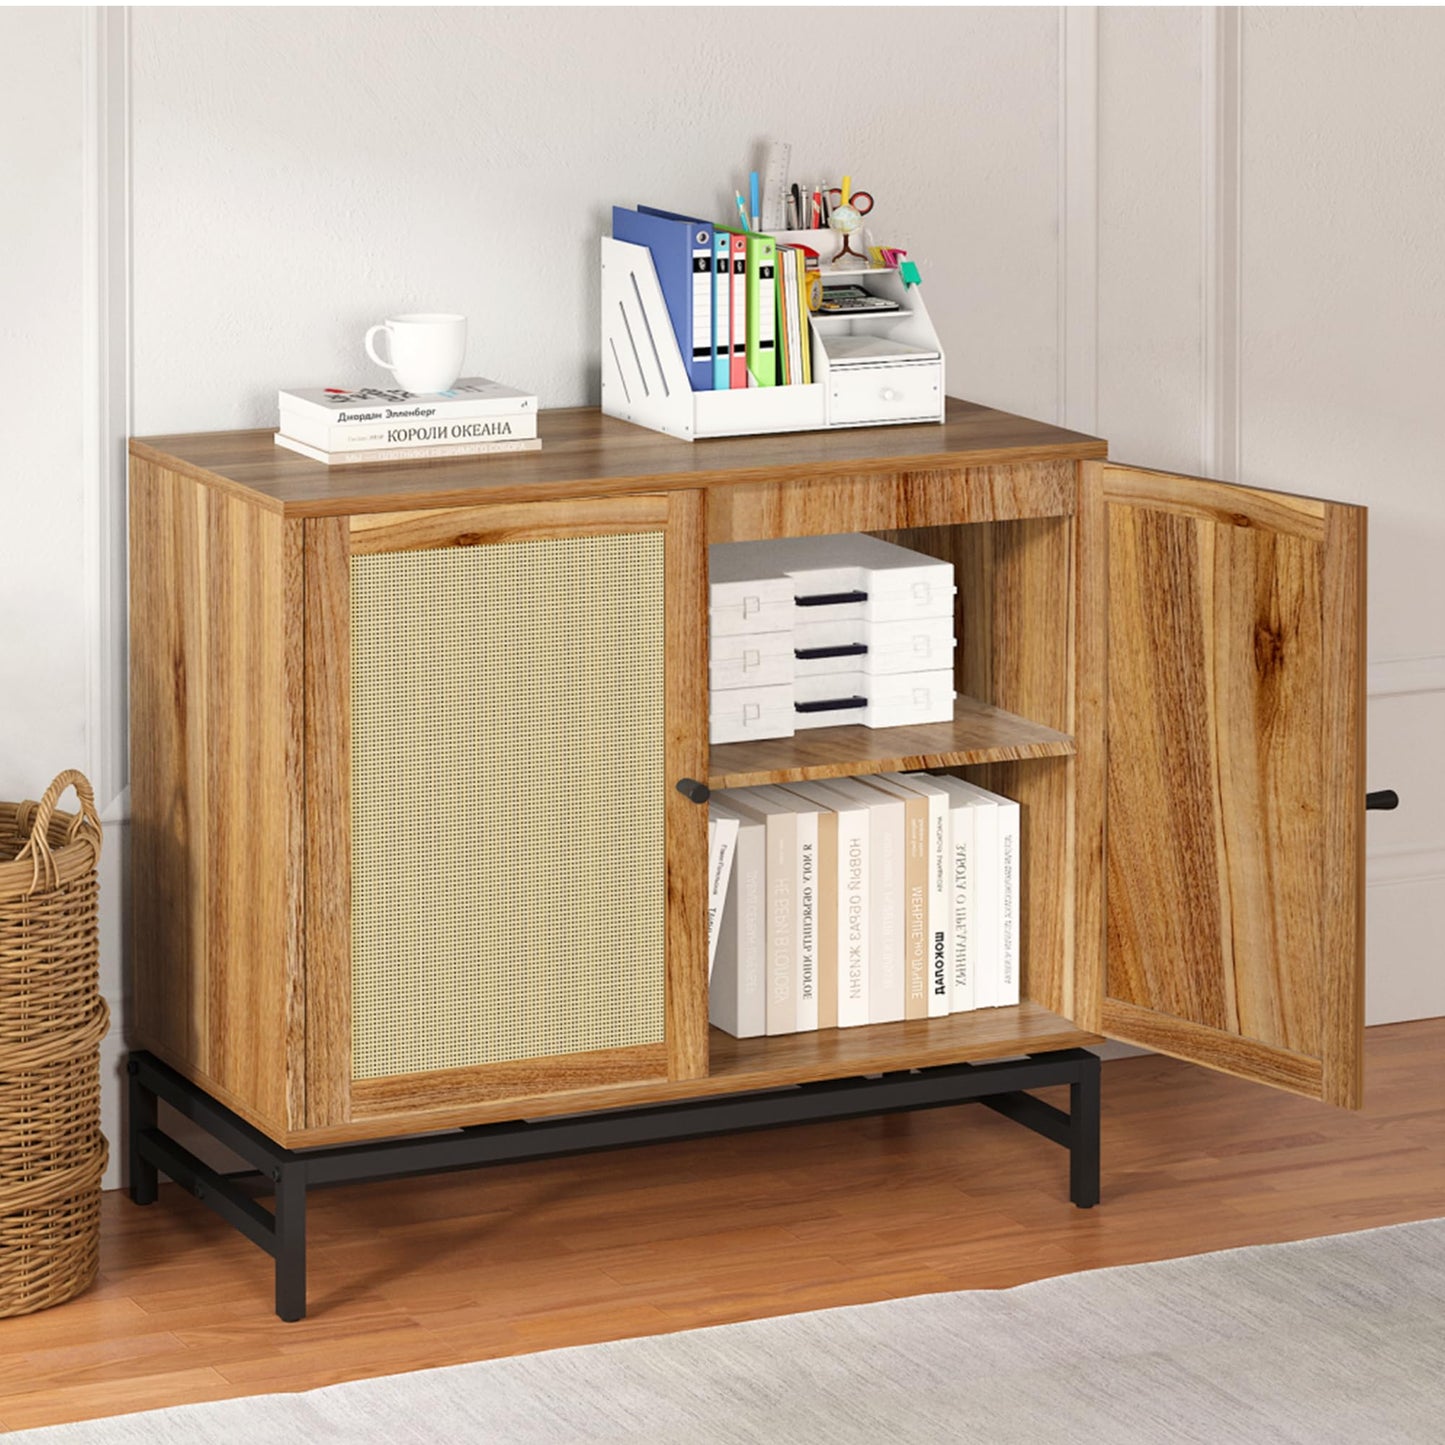 AWQM Sideboard Buffet Cabinet with Storage,Rattan Storage Cabinet with Doors Accent Cabinet Buffet Table with Metal Feet,Kitchen Console Cabinet Bar